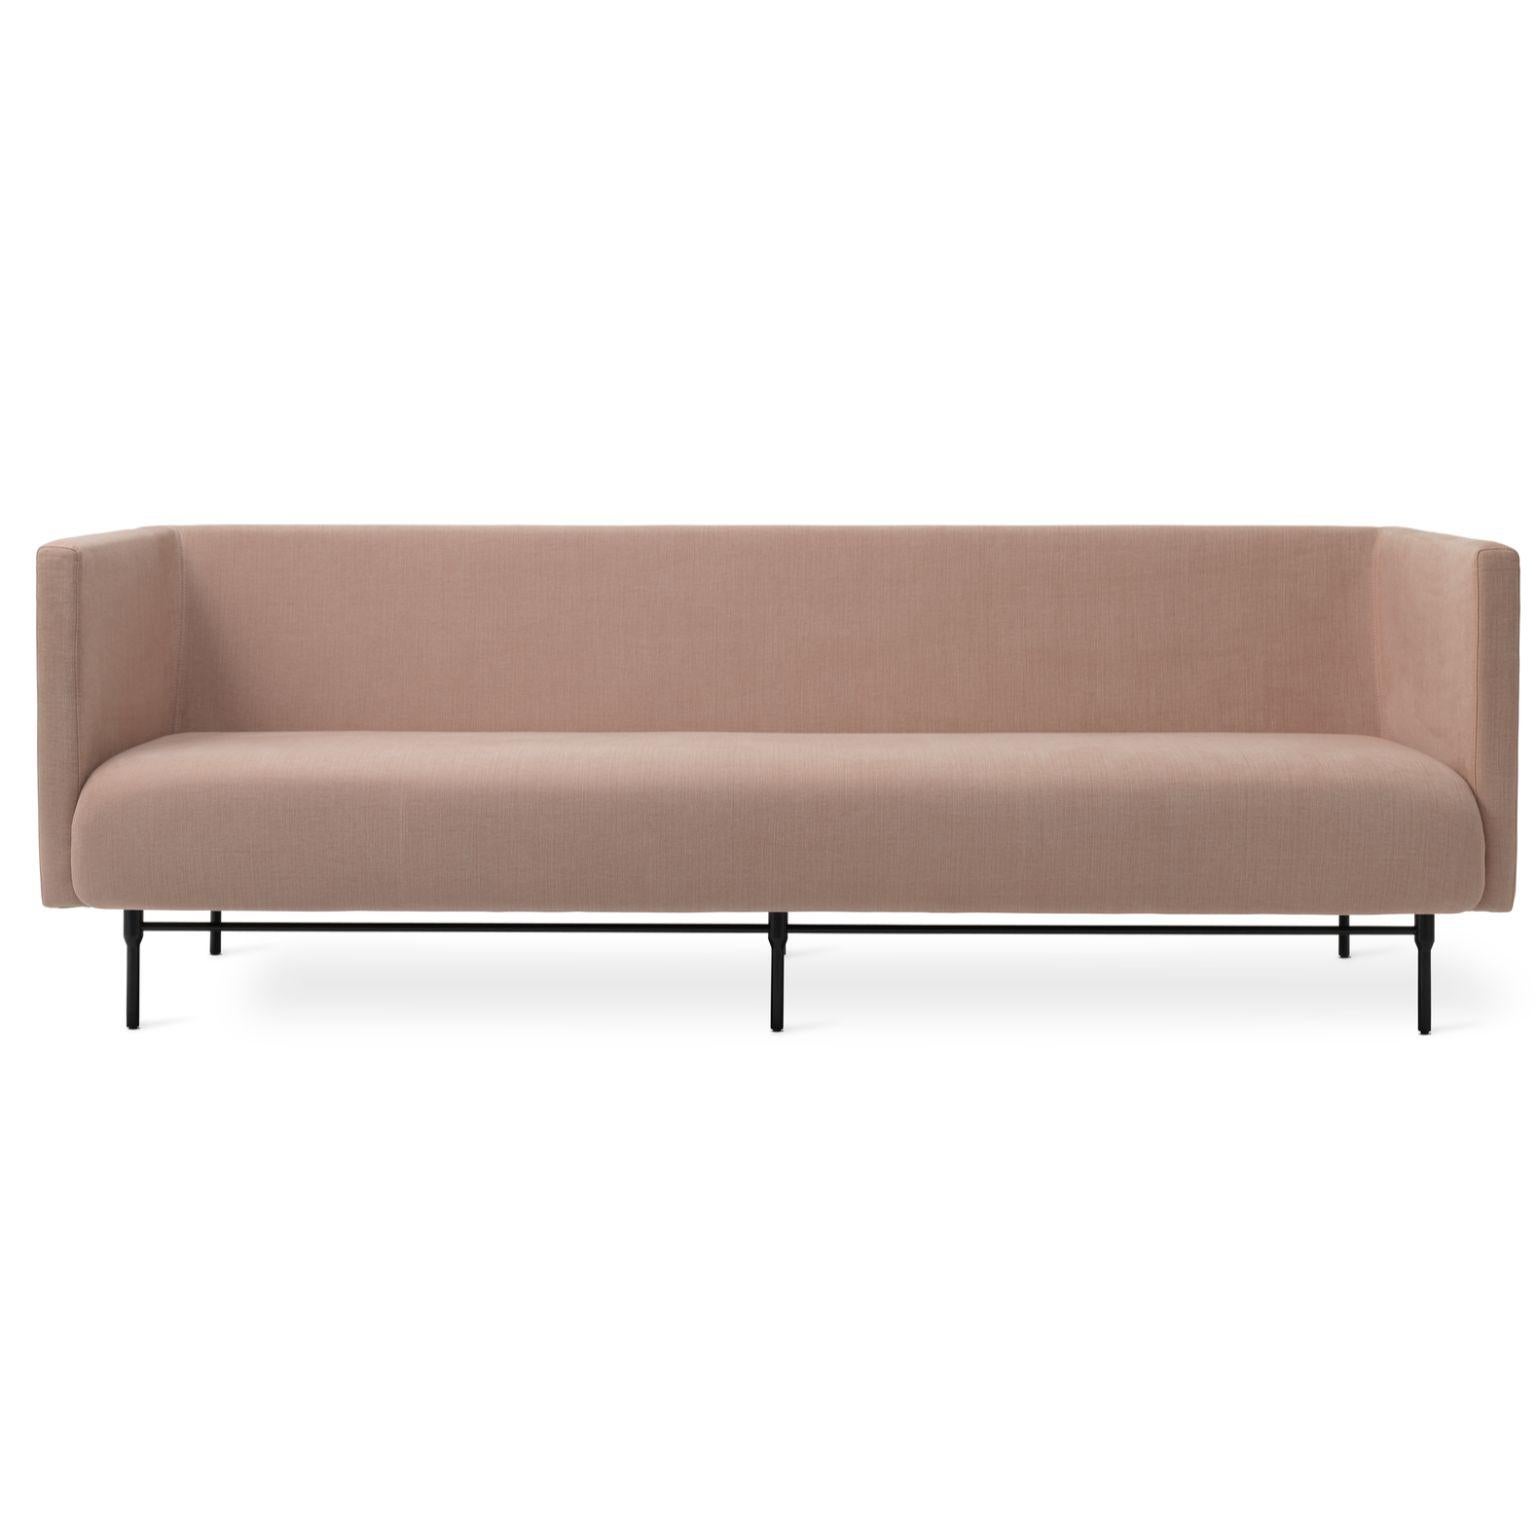 Galore 3 seater light rose by Warm Nordic
Dimensions: D 222 x W 83 x H 76 cm
Material: Textile upholstery, Powder coated black steel legs, Wooden frame, foam, spring system.
Weight: 62 kg
Also available in different colours and finishes.

Warm